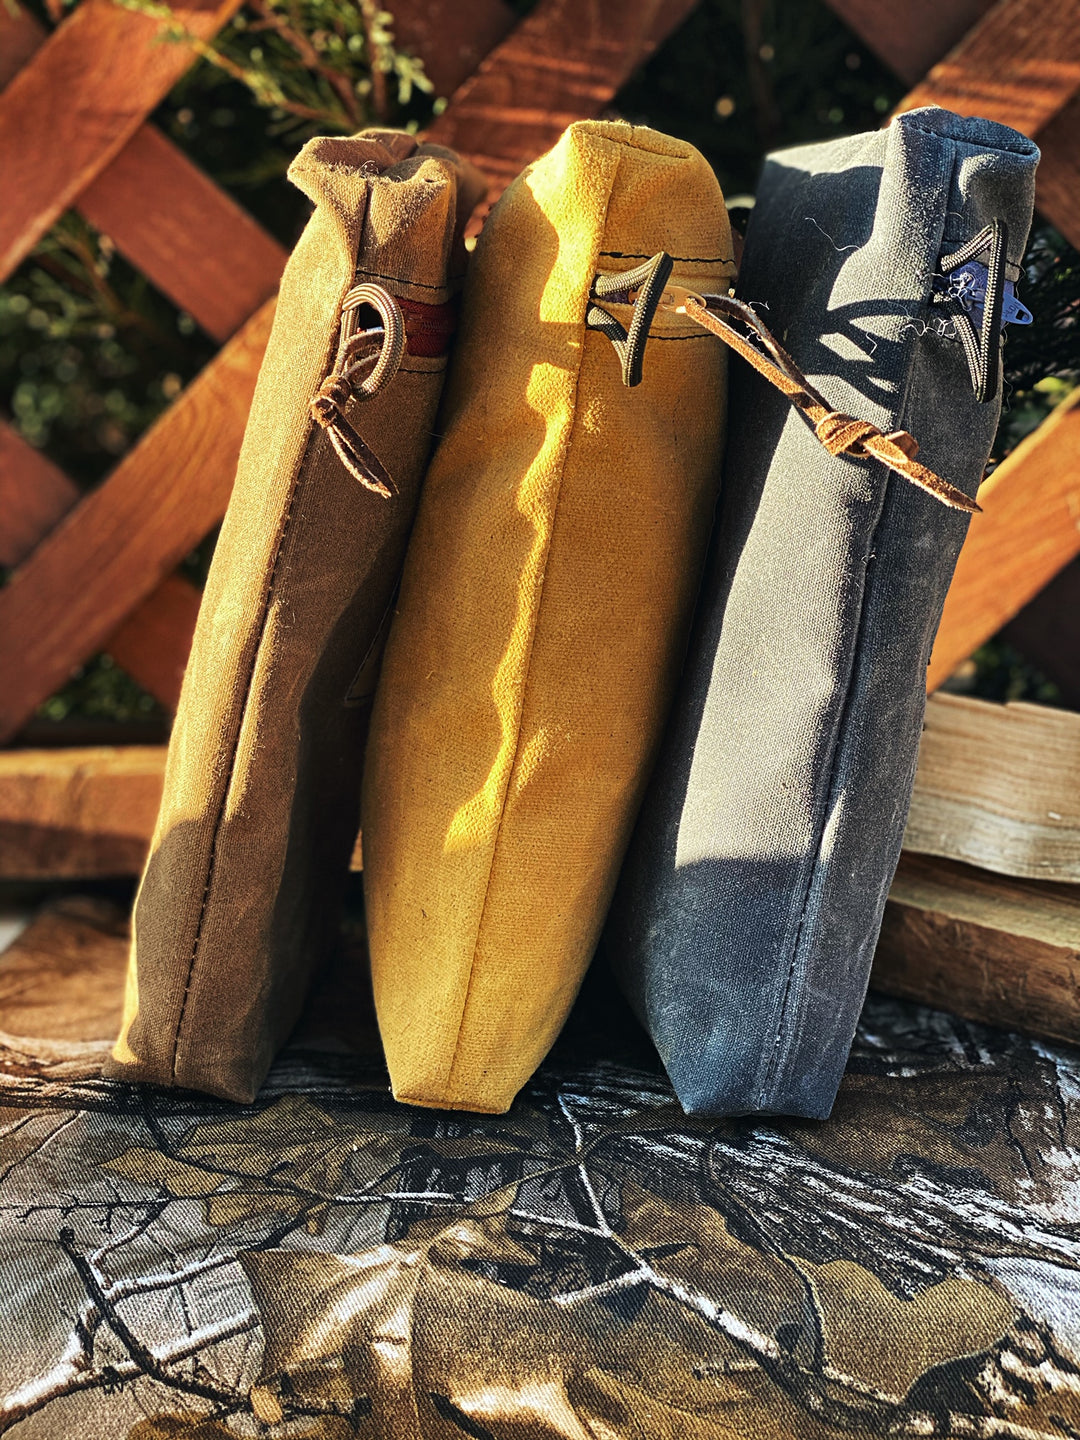 Handmade Waxed Canvas Old World EDC Pouch Bushcraft Survival Camping Possibles Dopp Grooming (Various Colors) - Colorado Bushcraft